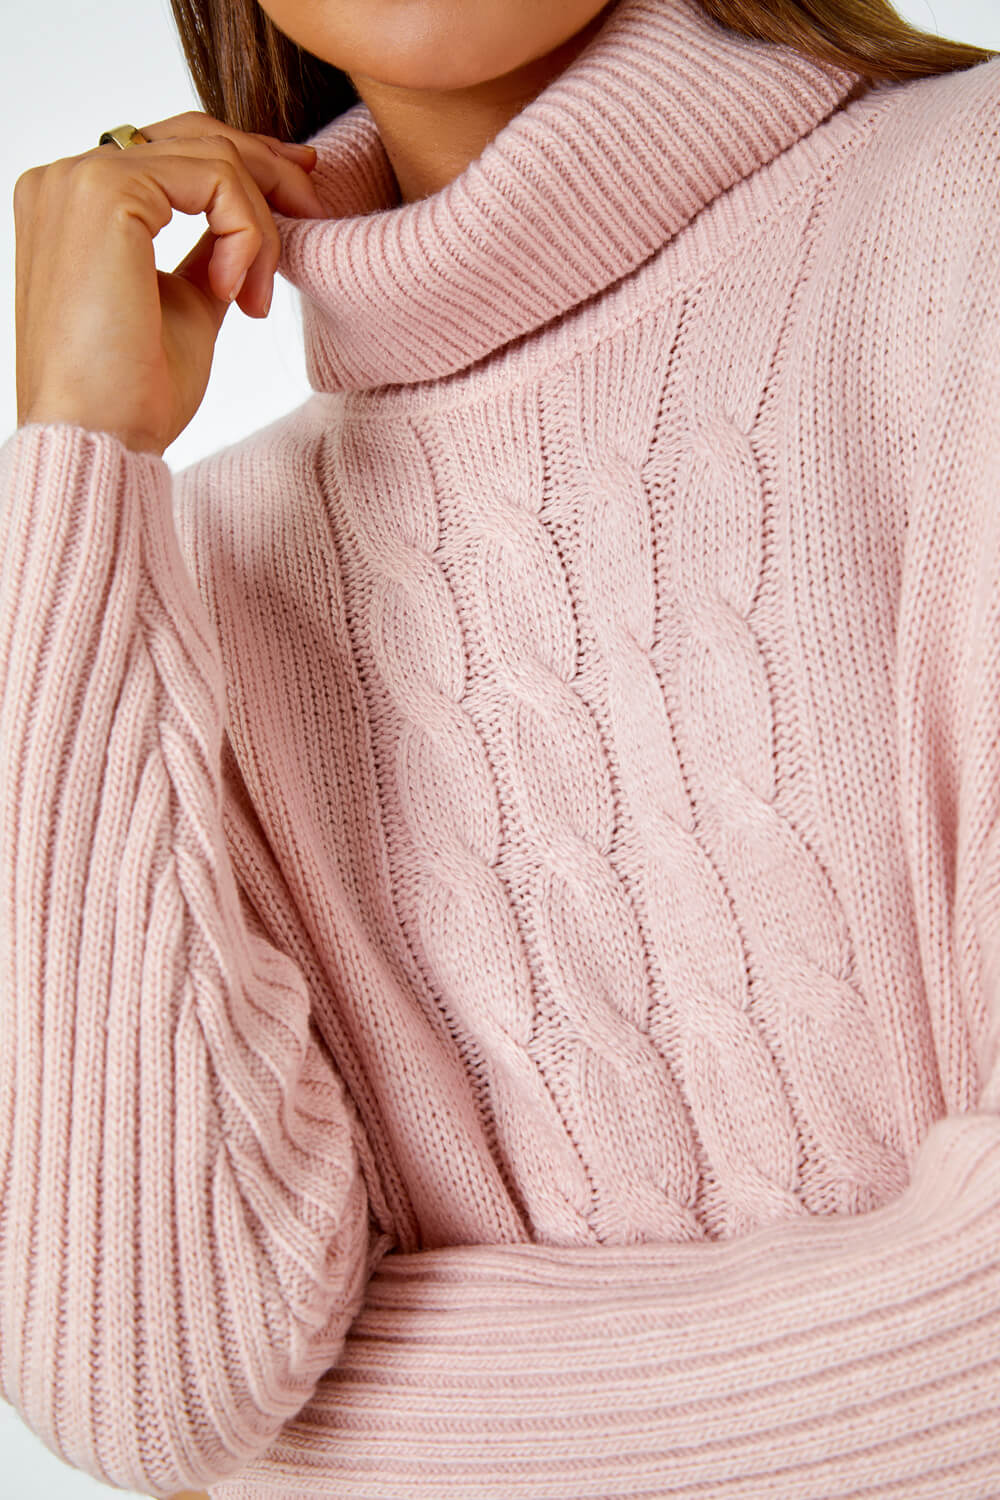 PINK Cable Knit Roll Neck Poncho Jumper, Image 5 of 5